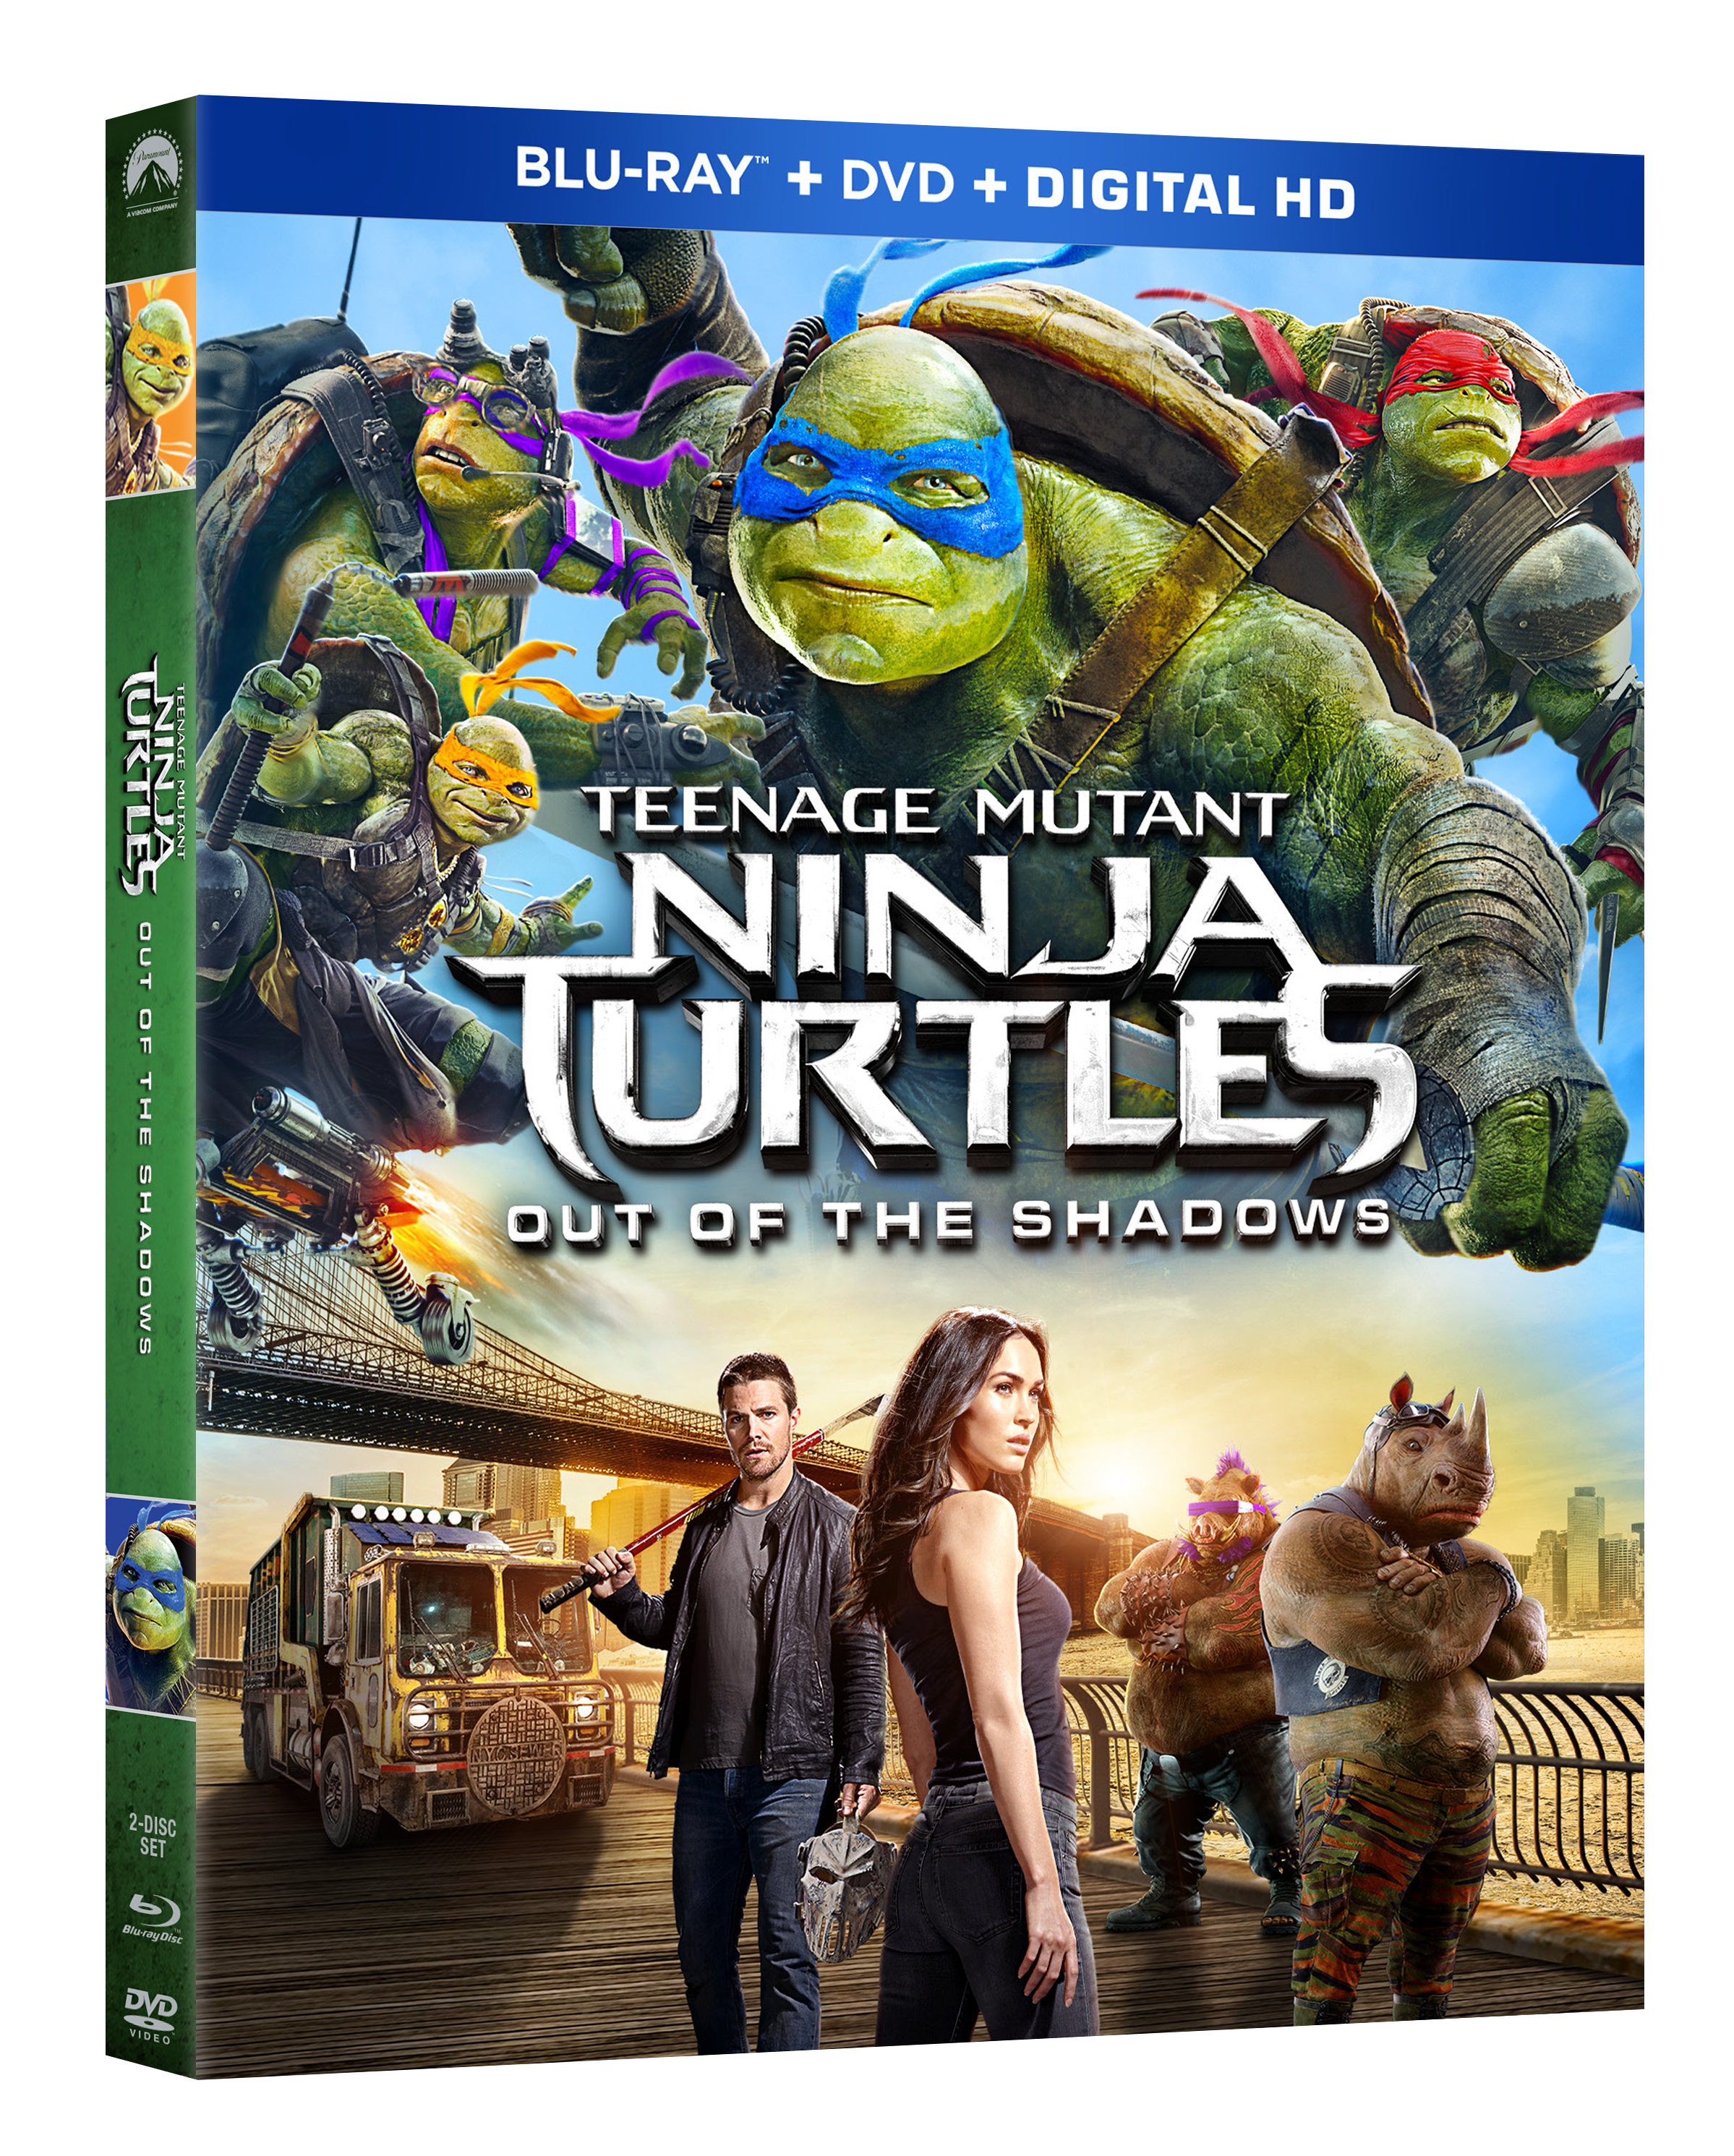 The Turtles Rule Again in the Best Family Action Movie of the Year